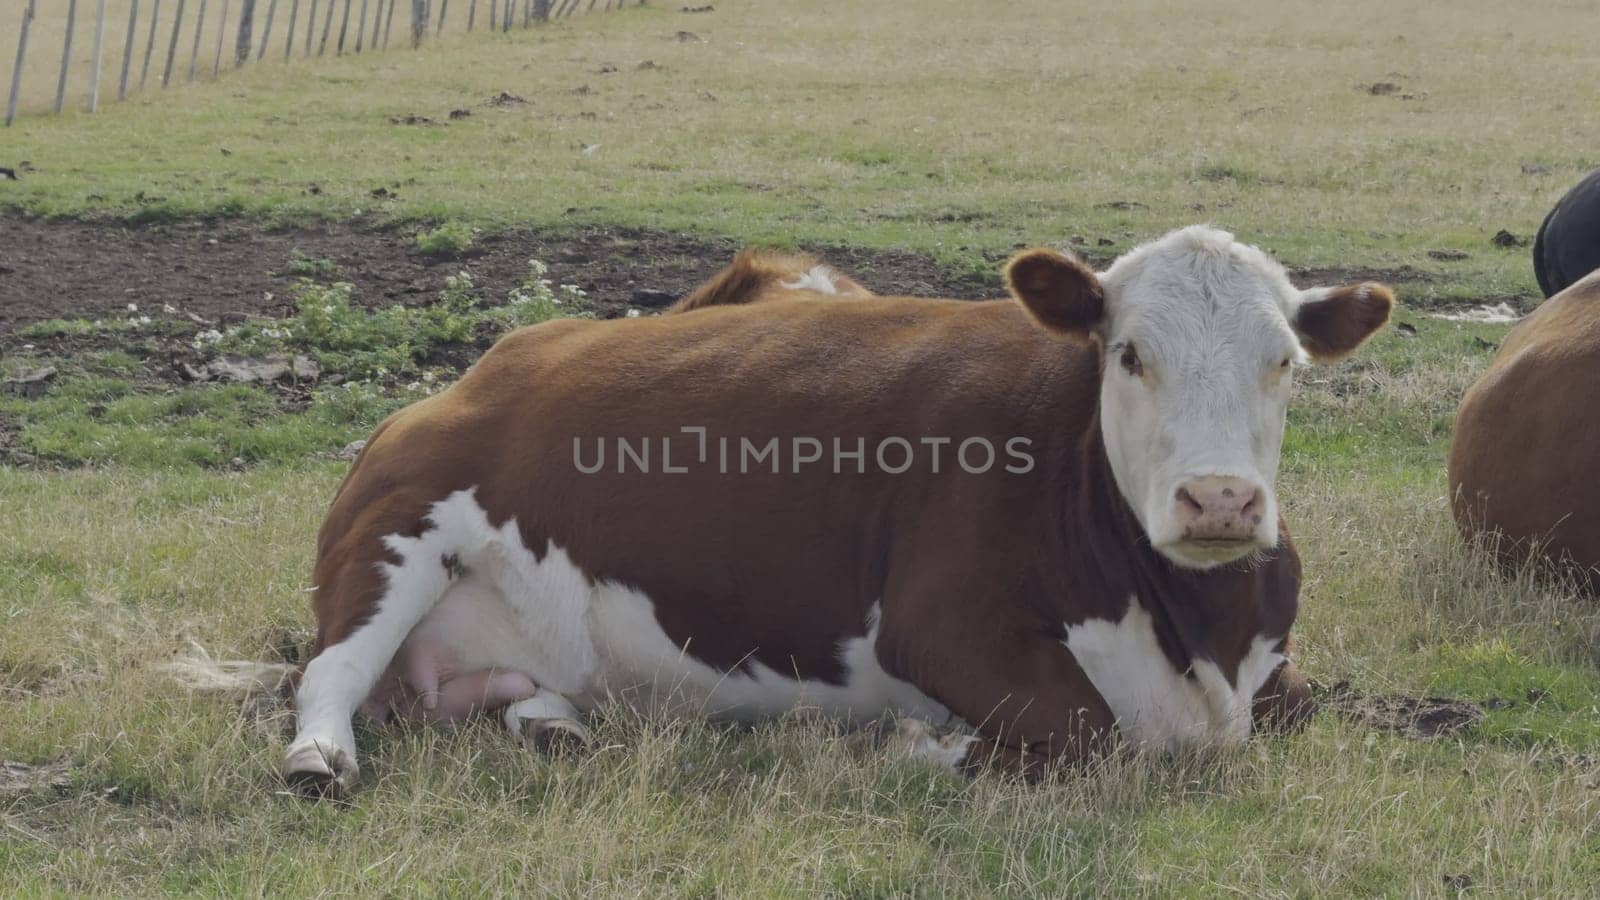 Relaxing Cow Chewing Grass in Slow Motion on Farm by FerradalFCG